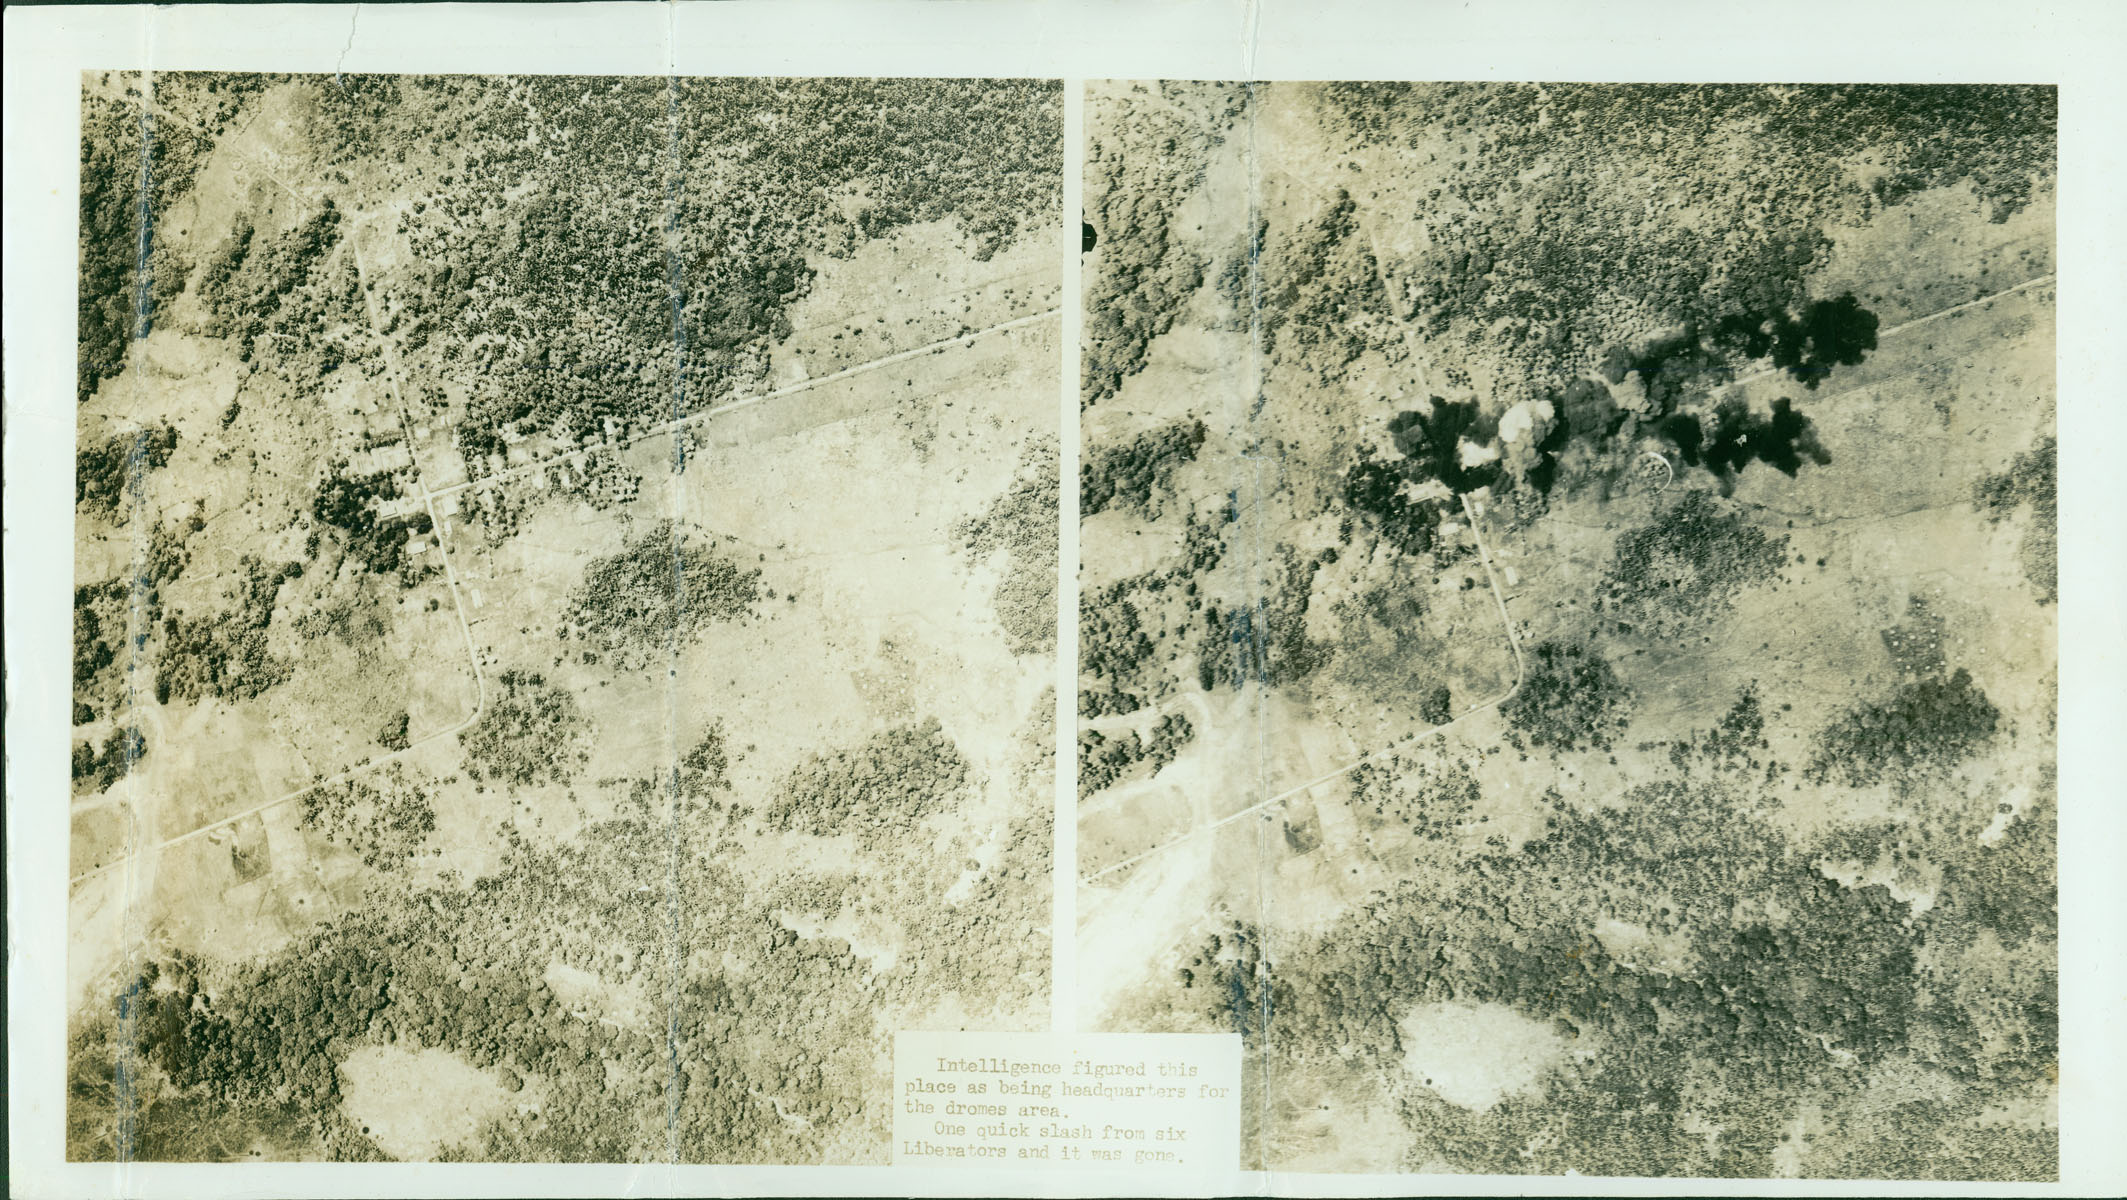 This photo reads, "Intelligence figured this place as being headquarters for the dromes area. One quick slash from six liberators and it was gone." One the right side of this aerial view, smoke rises after several bombs were dropped on the “headquarters”. A “drome” is an airfield equipped with control towers and hangers. It was particularly important for the Allies to destroy the landing strips to prevent Japanese reinforcements from landing.